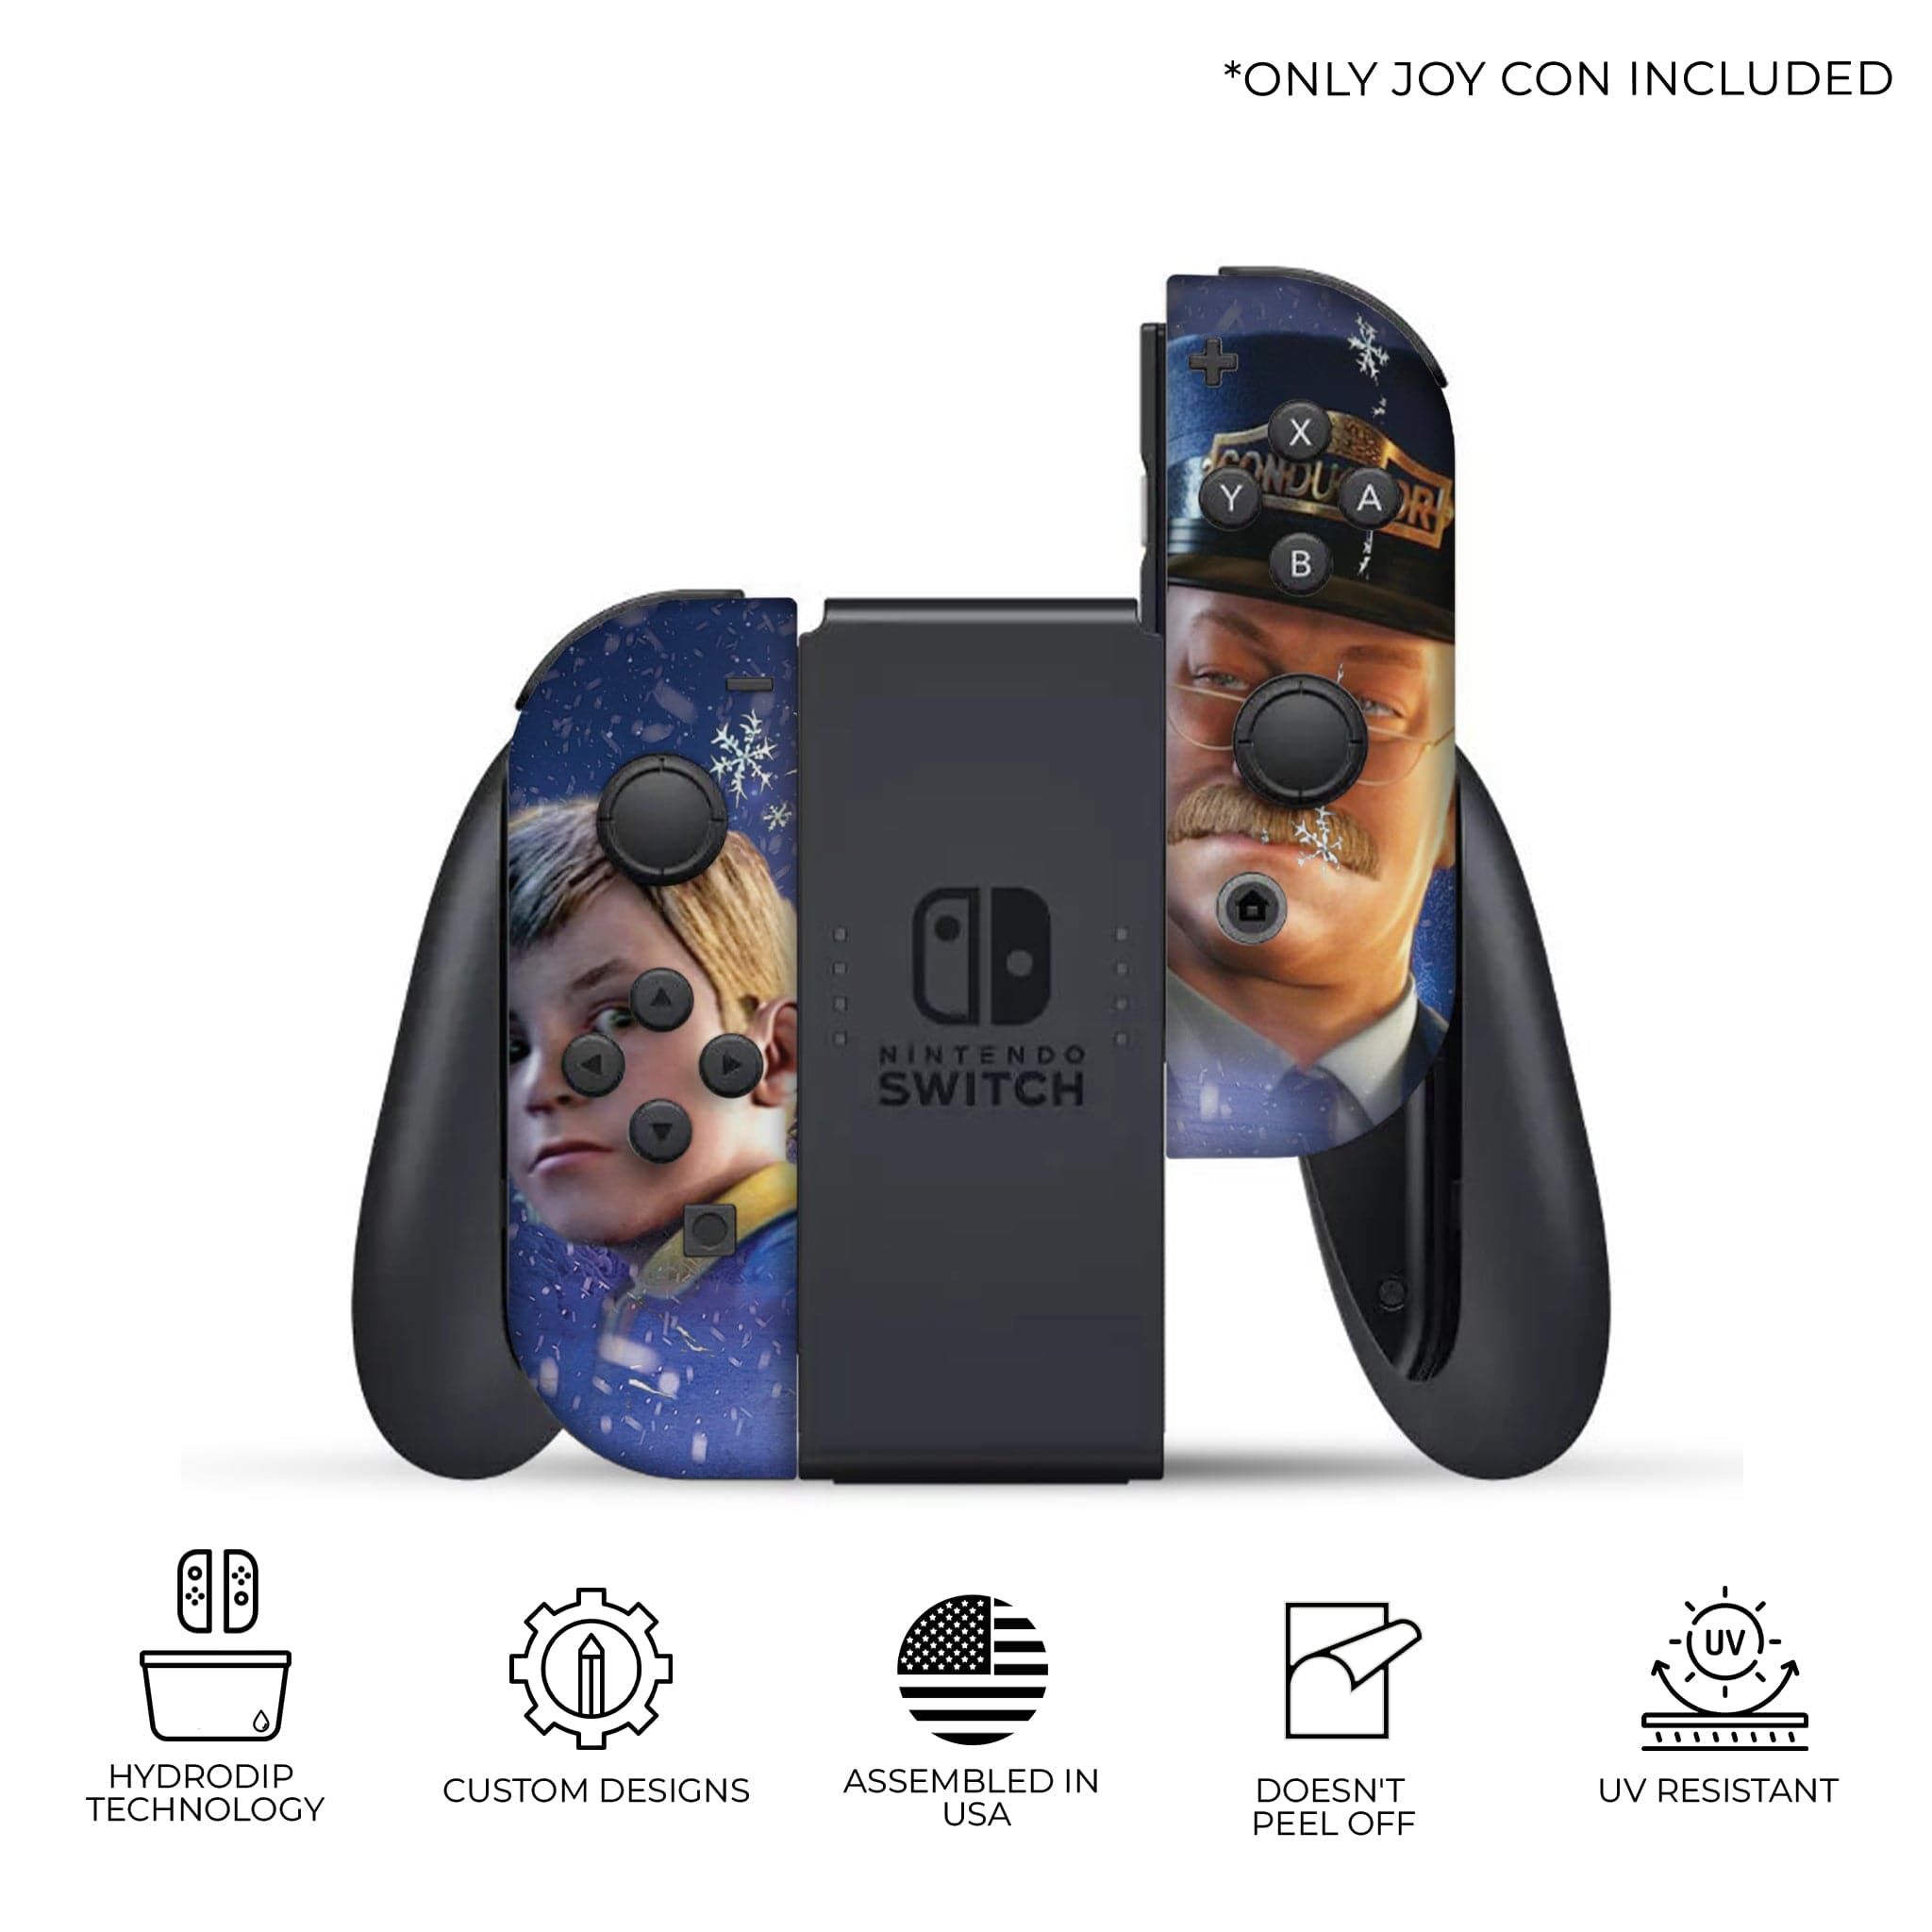 Polar Express Joy-Con Left and Right Switch Controllers by Nintendo